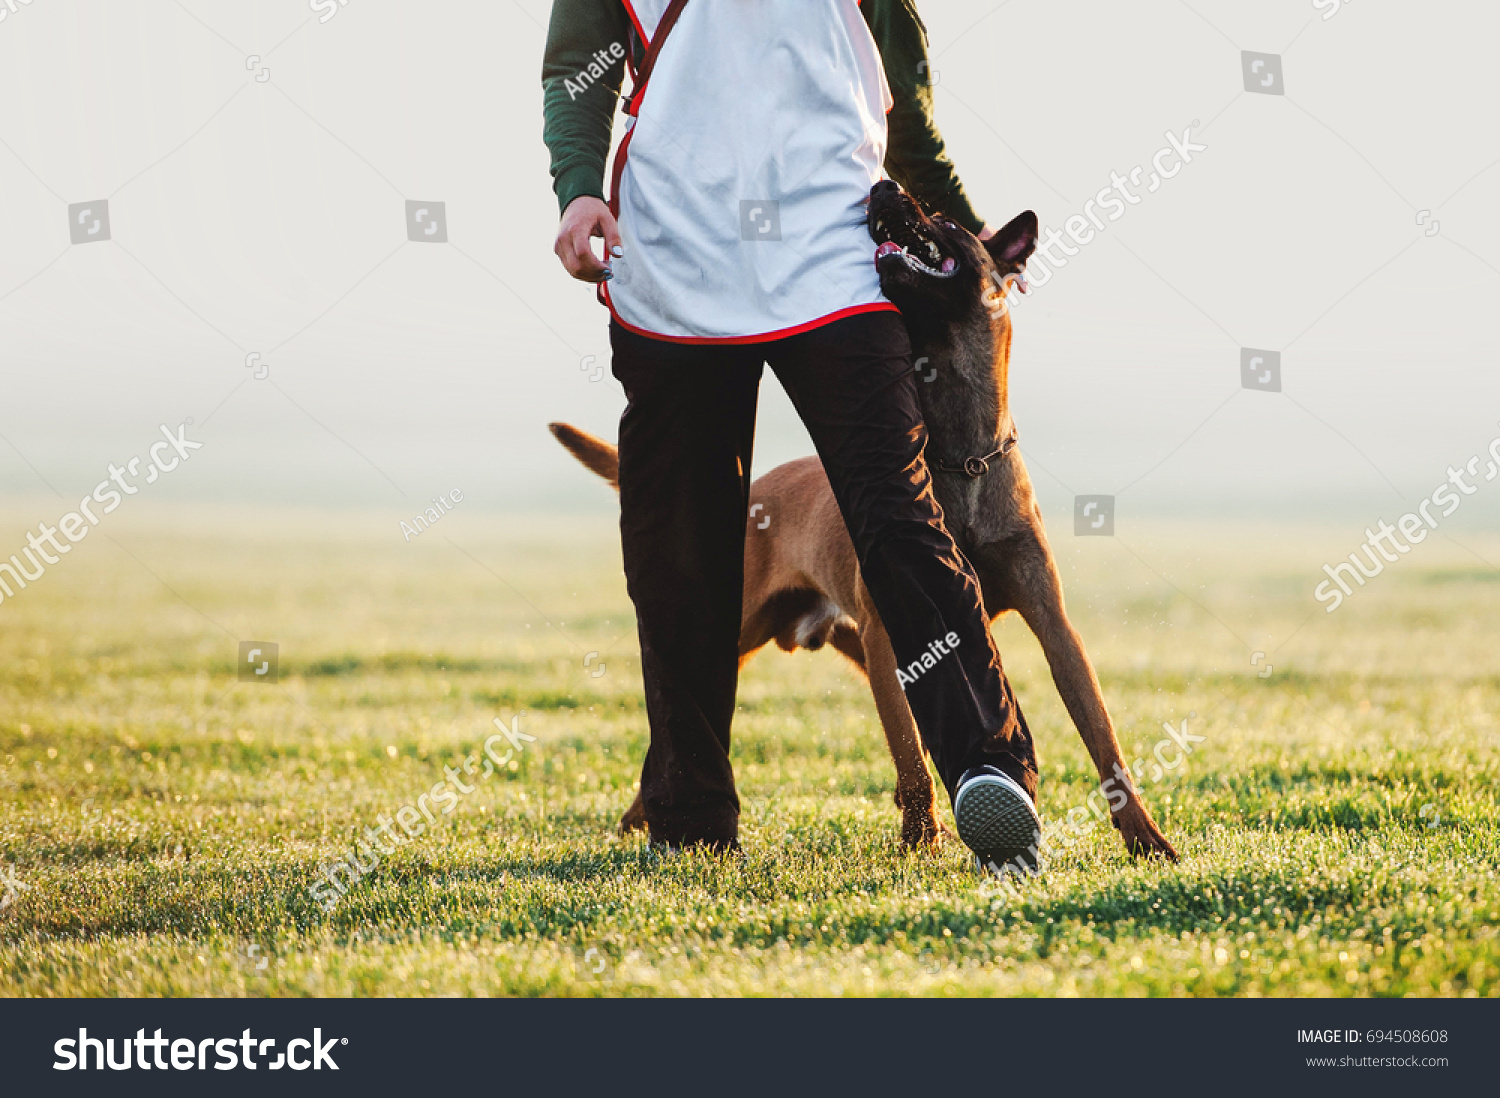 Beloved dog breed Belgian shepherd dog walks next to man and looks in the eyes. Training with raspberry on a blurred background on the field #694508608